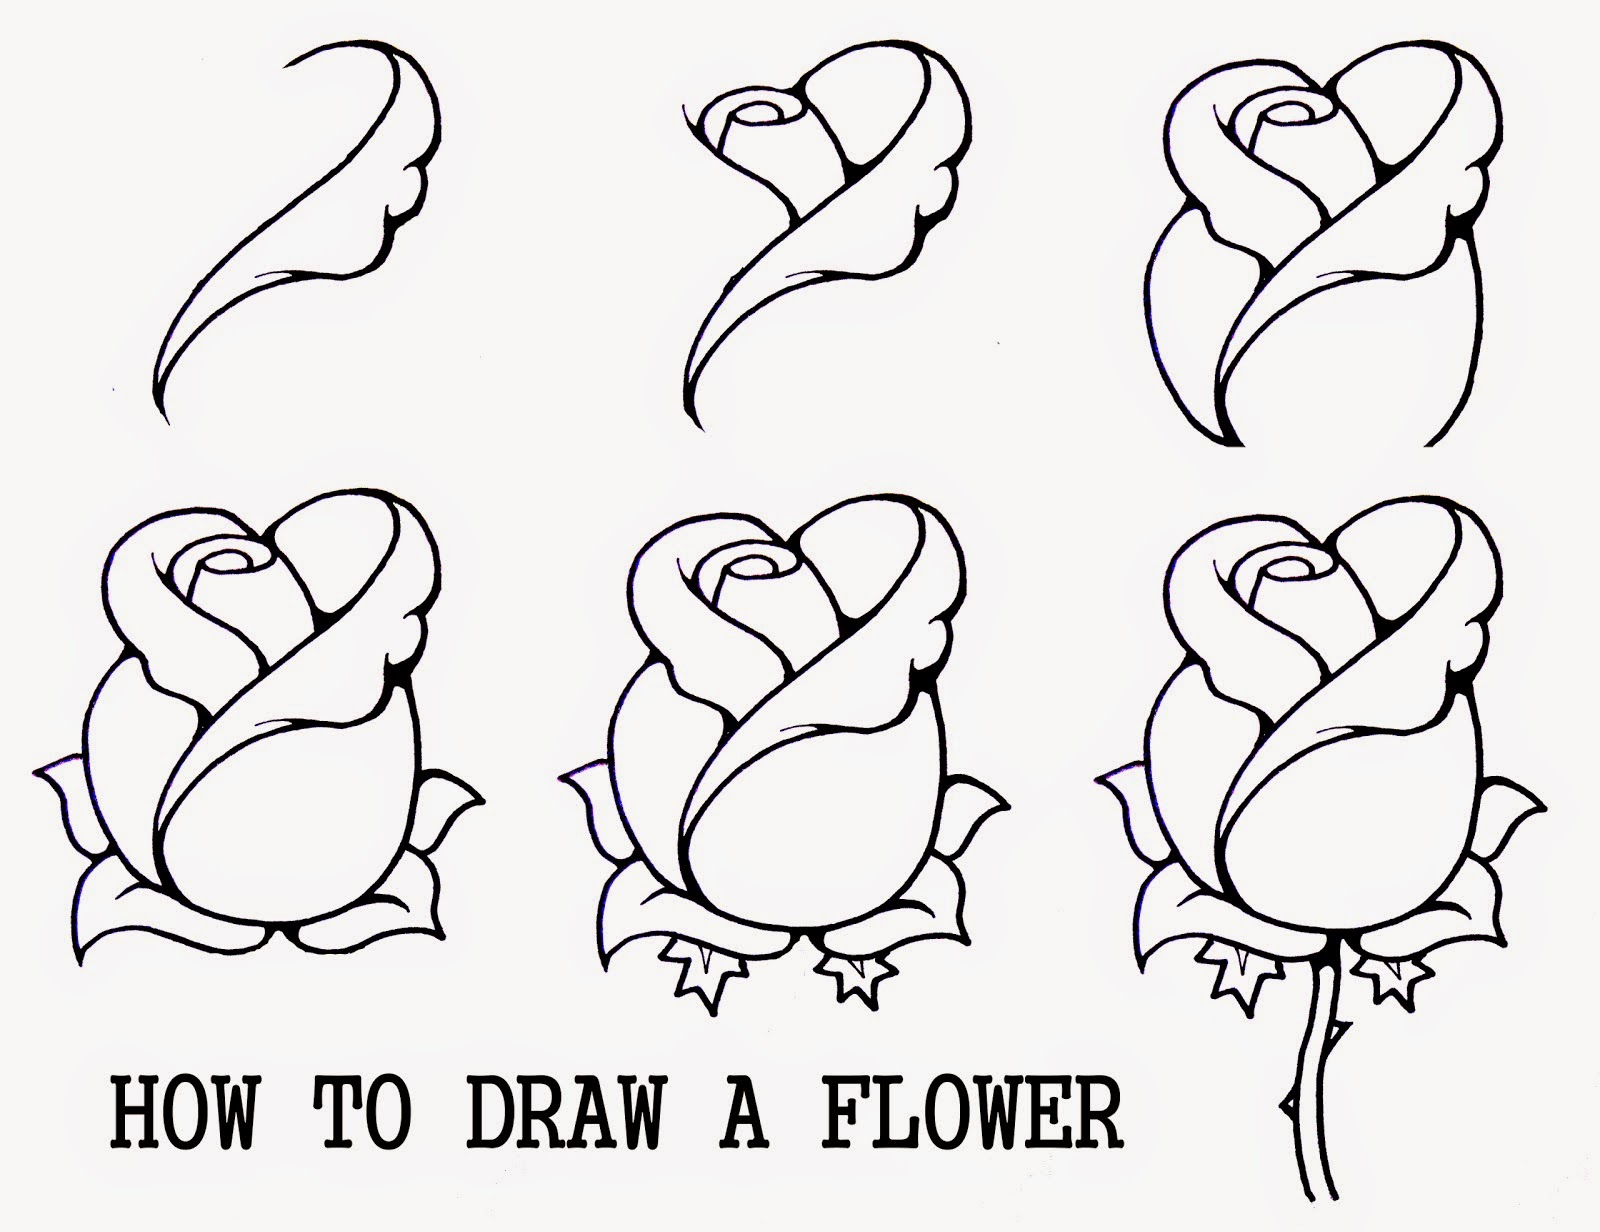 6. Step by Step Guide to Creating Flower Nails - wide 3